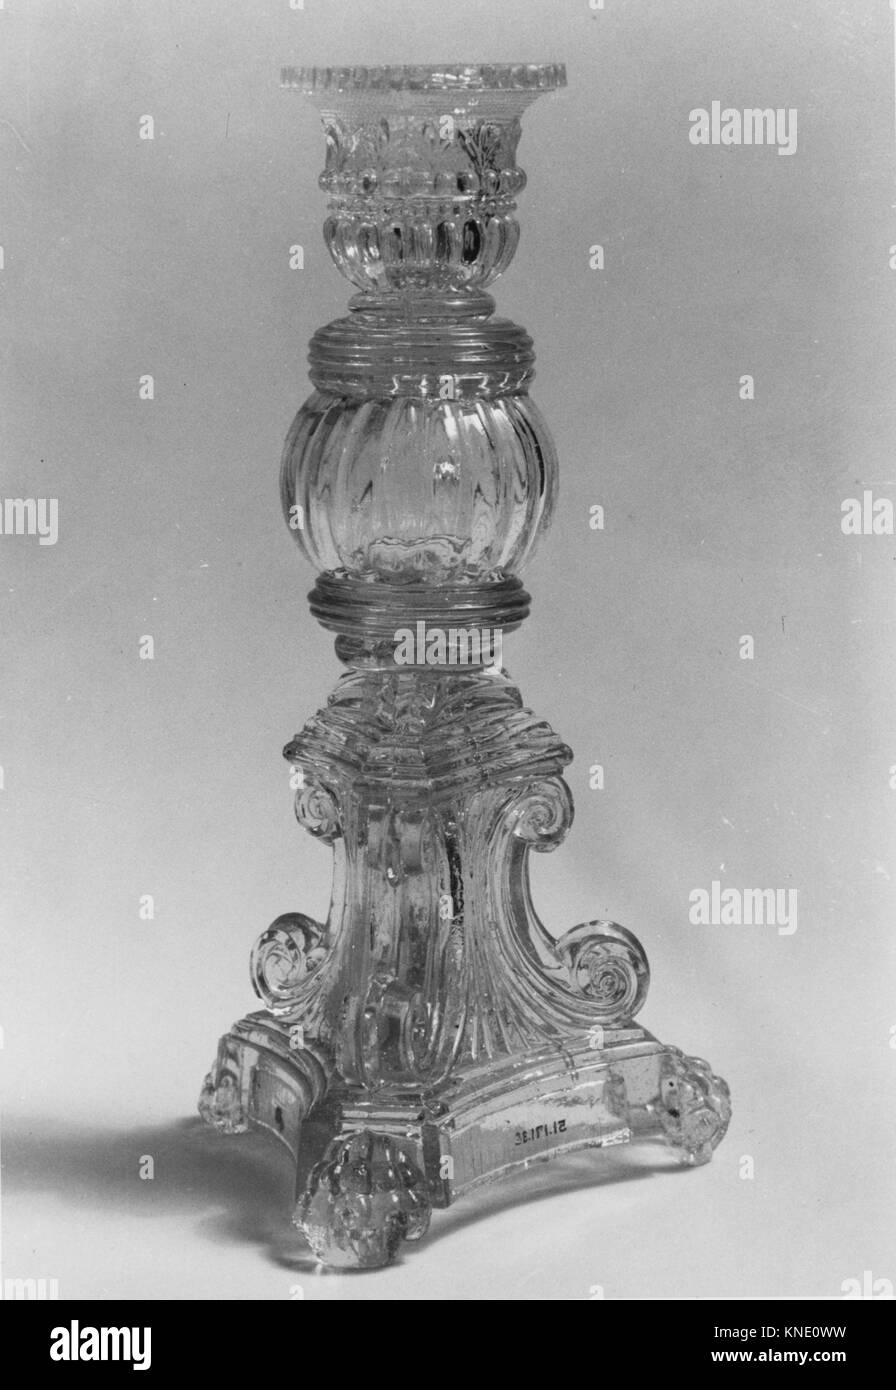 Candlestick MET 153229 1214 American, Candlestick, 1830?35, Lacy pressed glass, H. 8 15/16 in. (22.7 cm). The Metropolitan Museum of Art, New York. Gift of Mrs. Charles W. Green, in memory of Dr. Charles W. Green, 1951 (51.171.32) Stock Photo